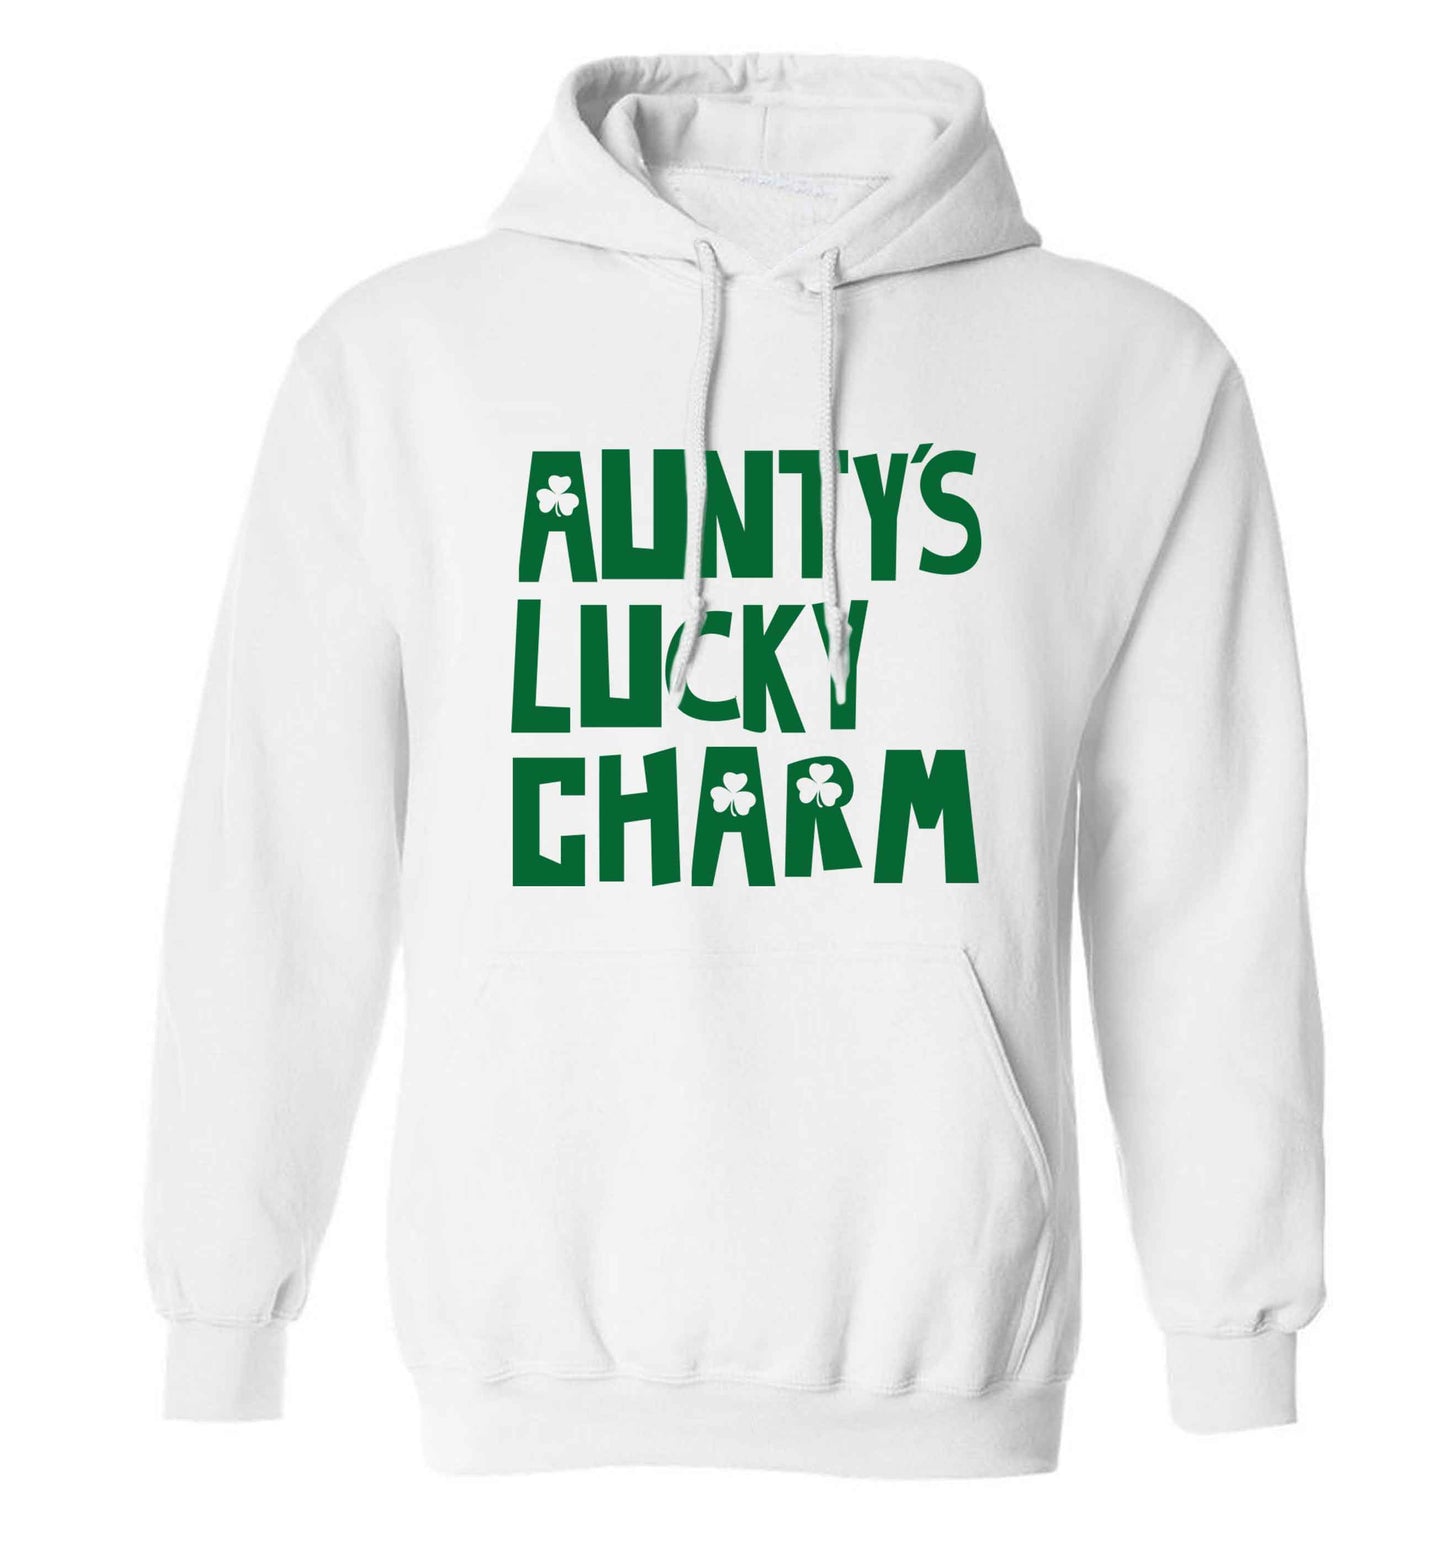 Aunty's lucky charm adults unisex white hoodie 2XL